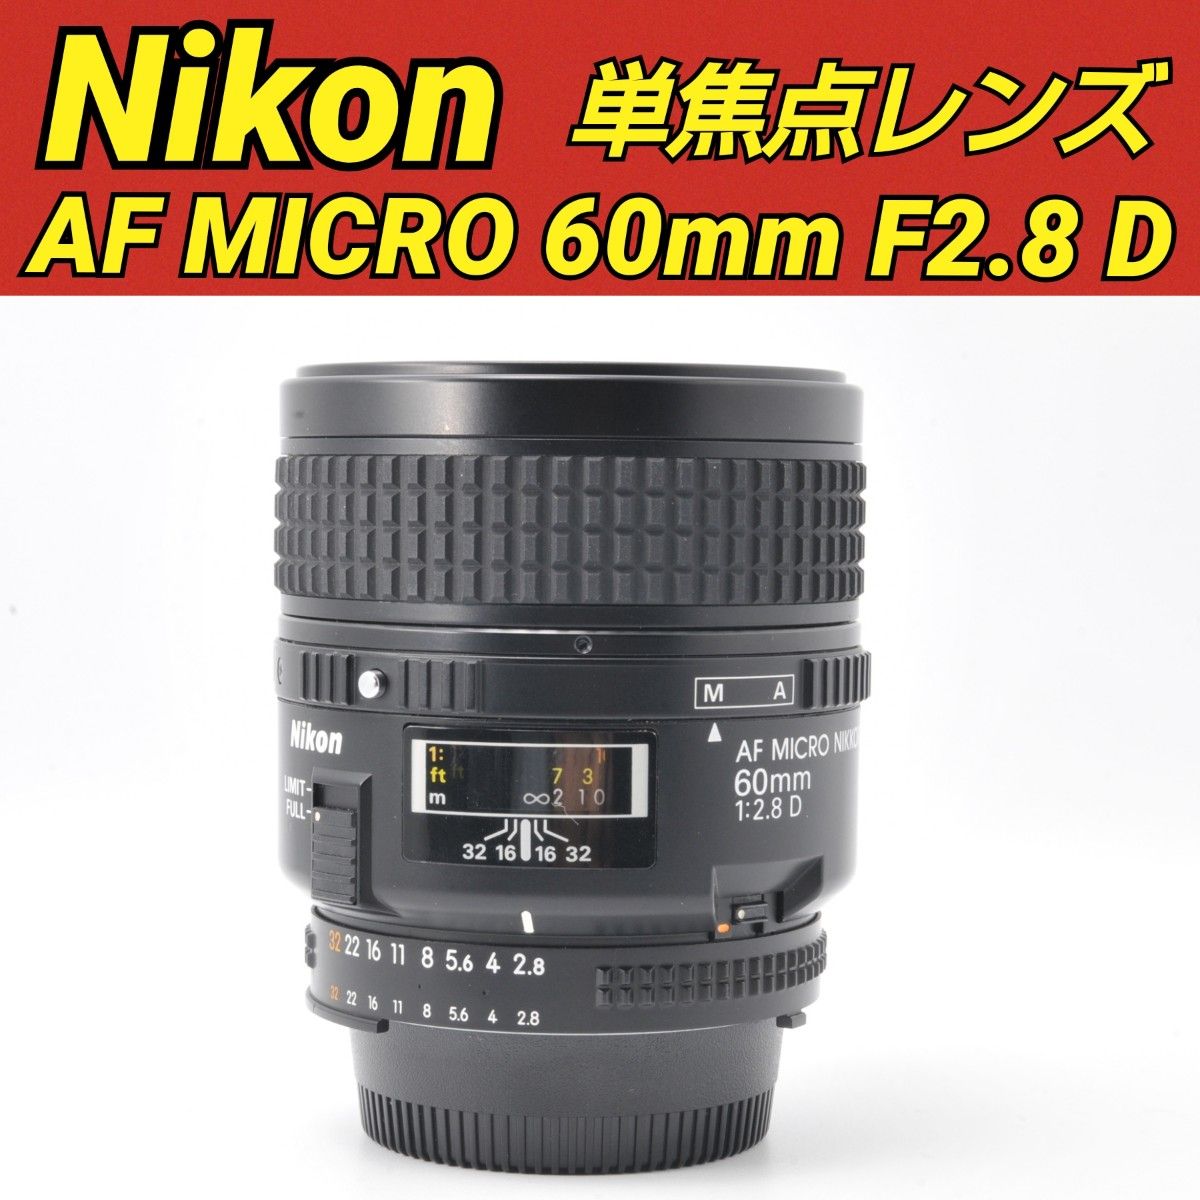 Nikon AF MICRO NIKKOR 60mm F2 8 D ニコン 単焦点レンズ｜PayPayフリマ